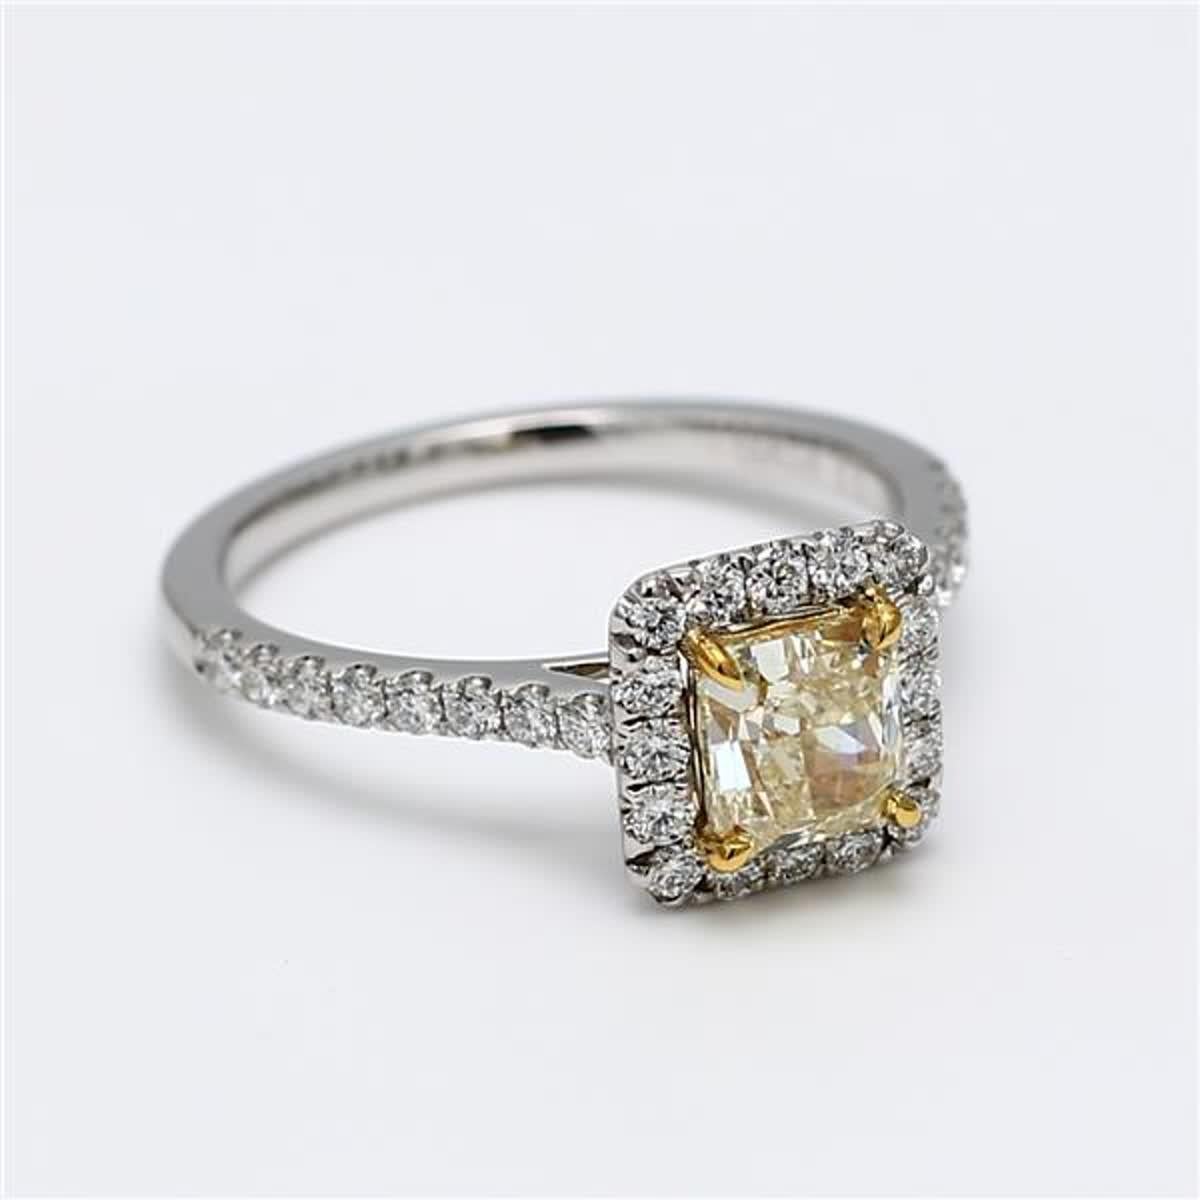 Women's GIA Certified Natural Yellow Radiant and White Diamond 1.36 Carat TW Plat Ring